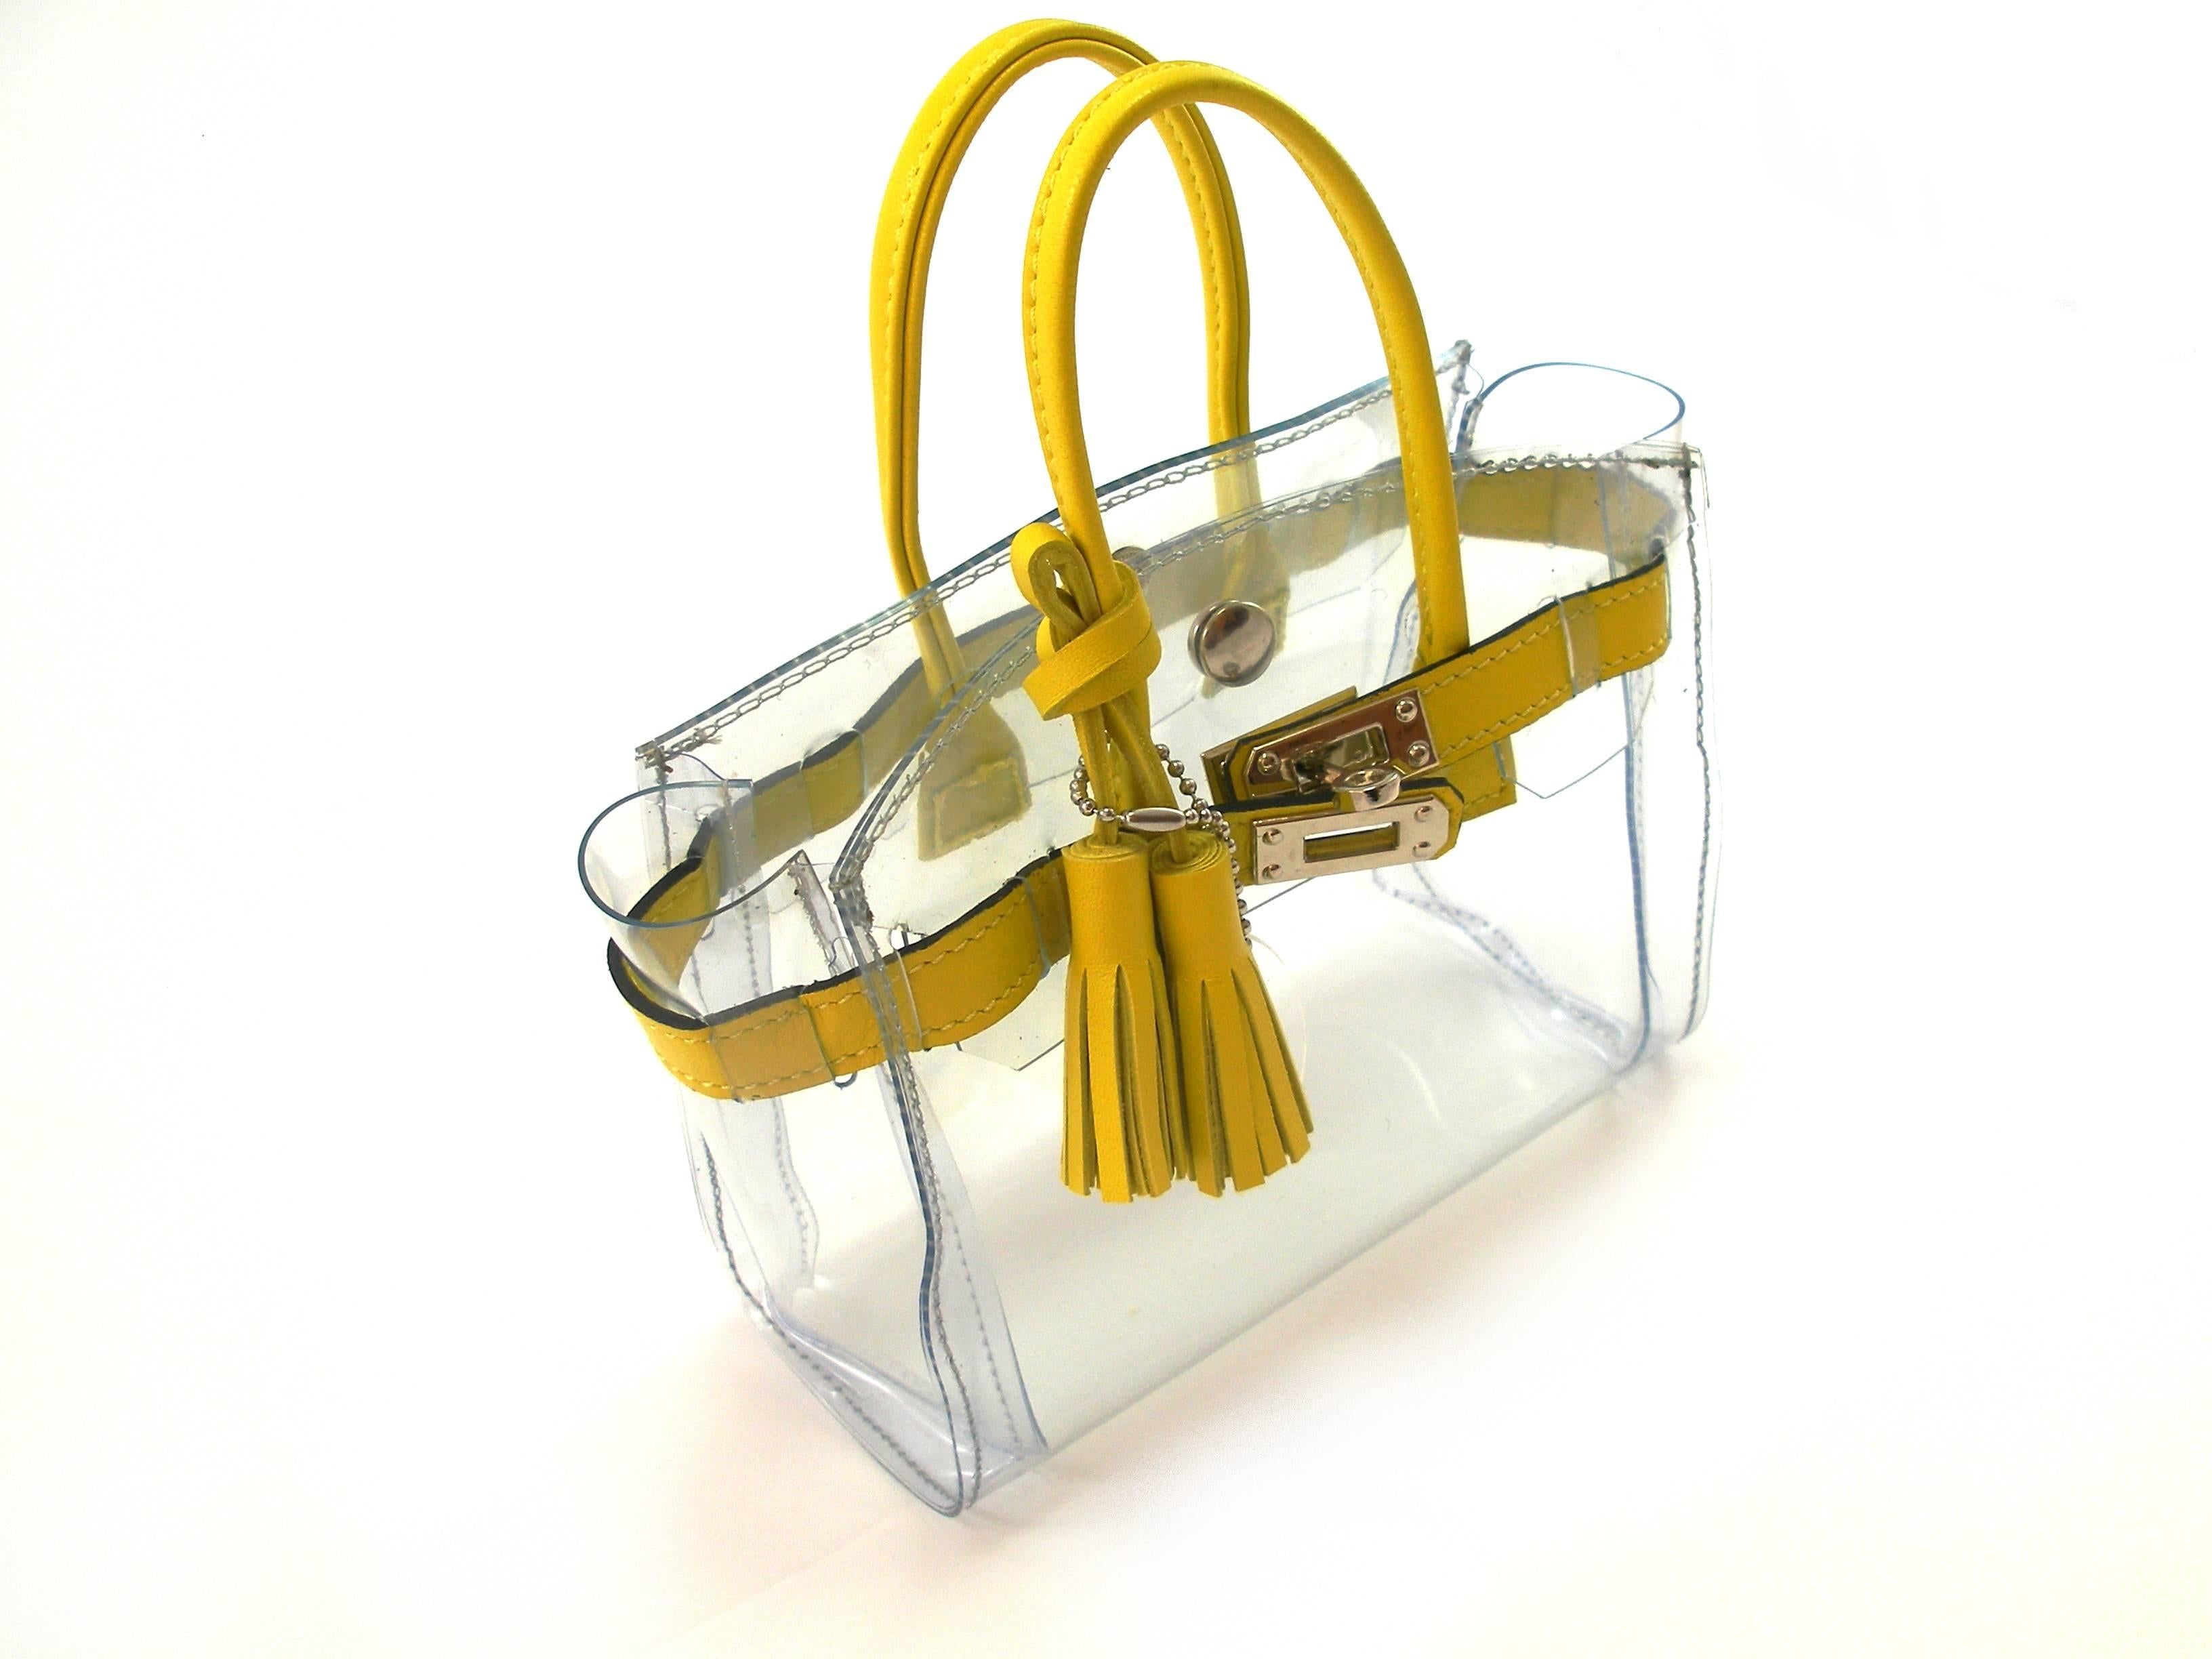 MA-GNI-FIC 
Our own production and brand filed Mon Autre Sac ® 
Highlight your luxury accessories!
Nice Pvc  and Leather Bag 
MINI Cabas Diamant 
Size :  16 X 12 X 7 cm 
Yellow leather
PVC 
Brand New
Its comes with dustbag Mon Autre Sac